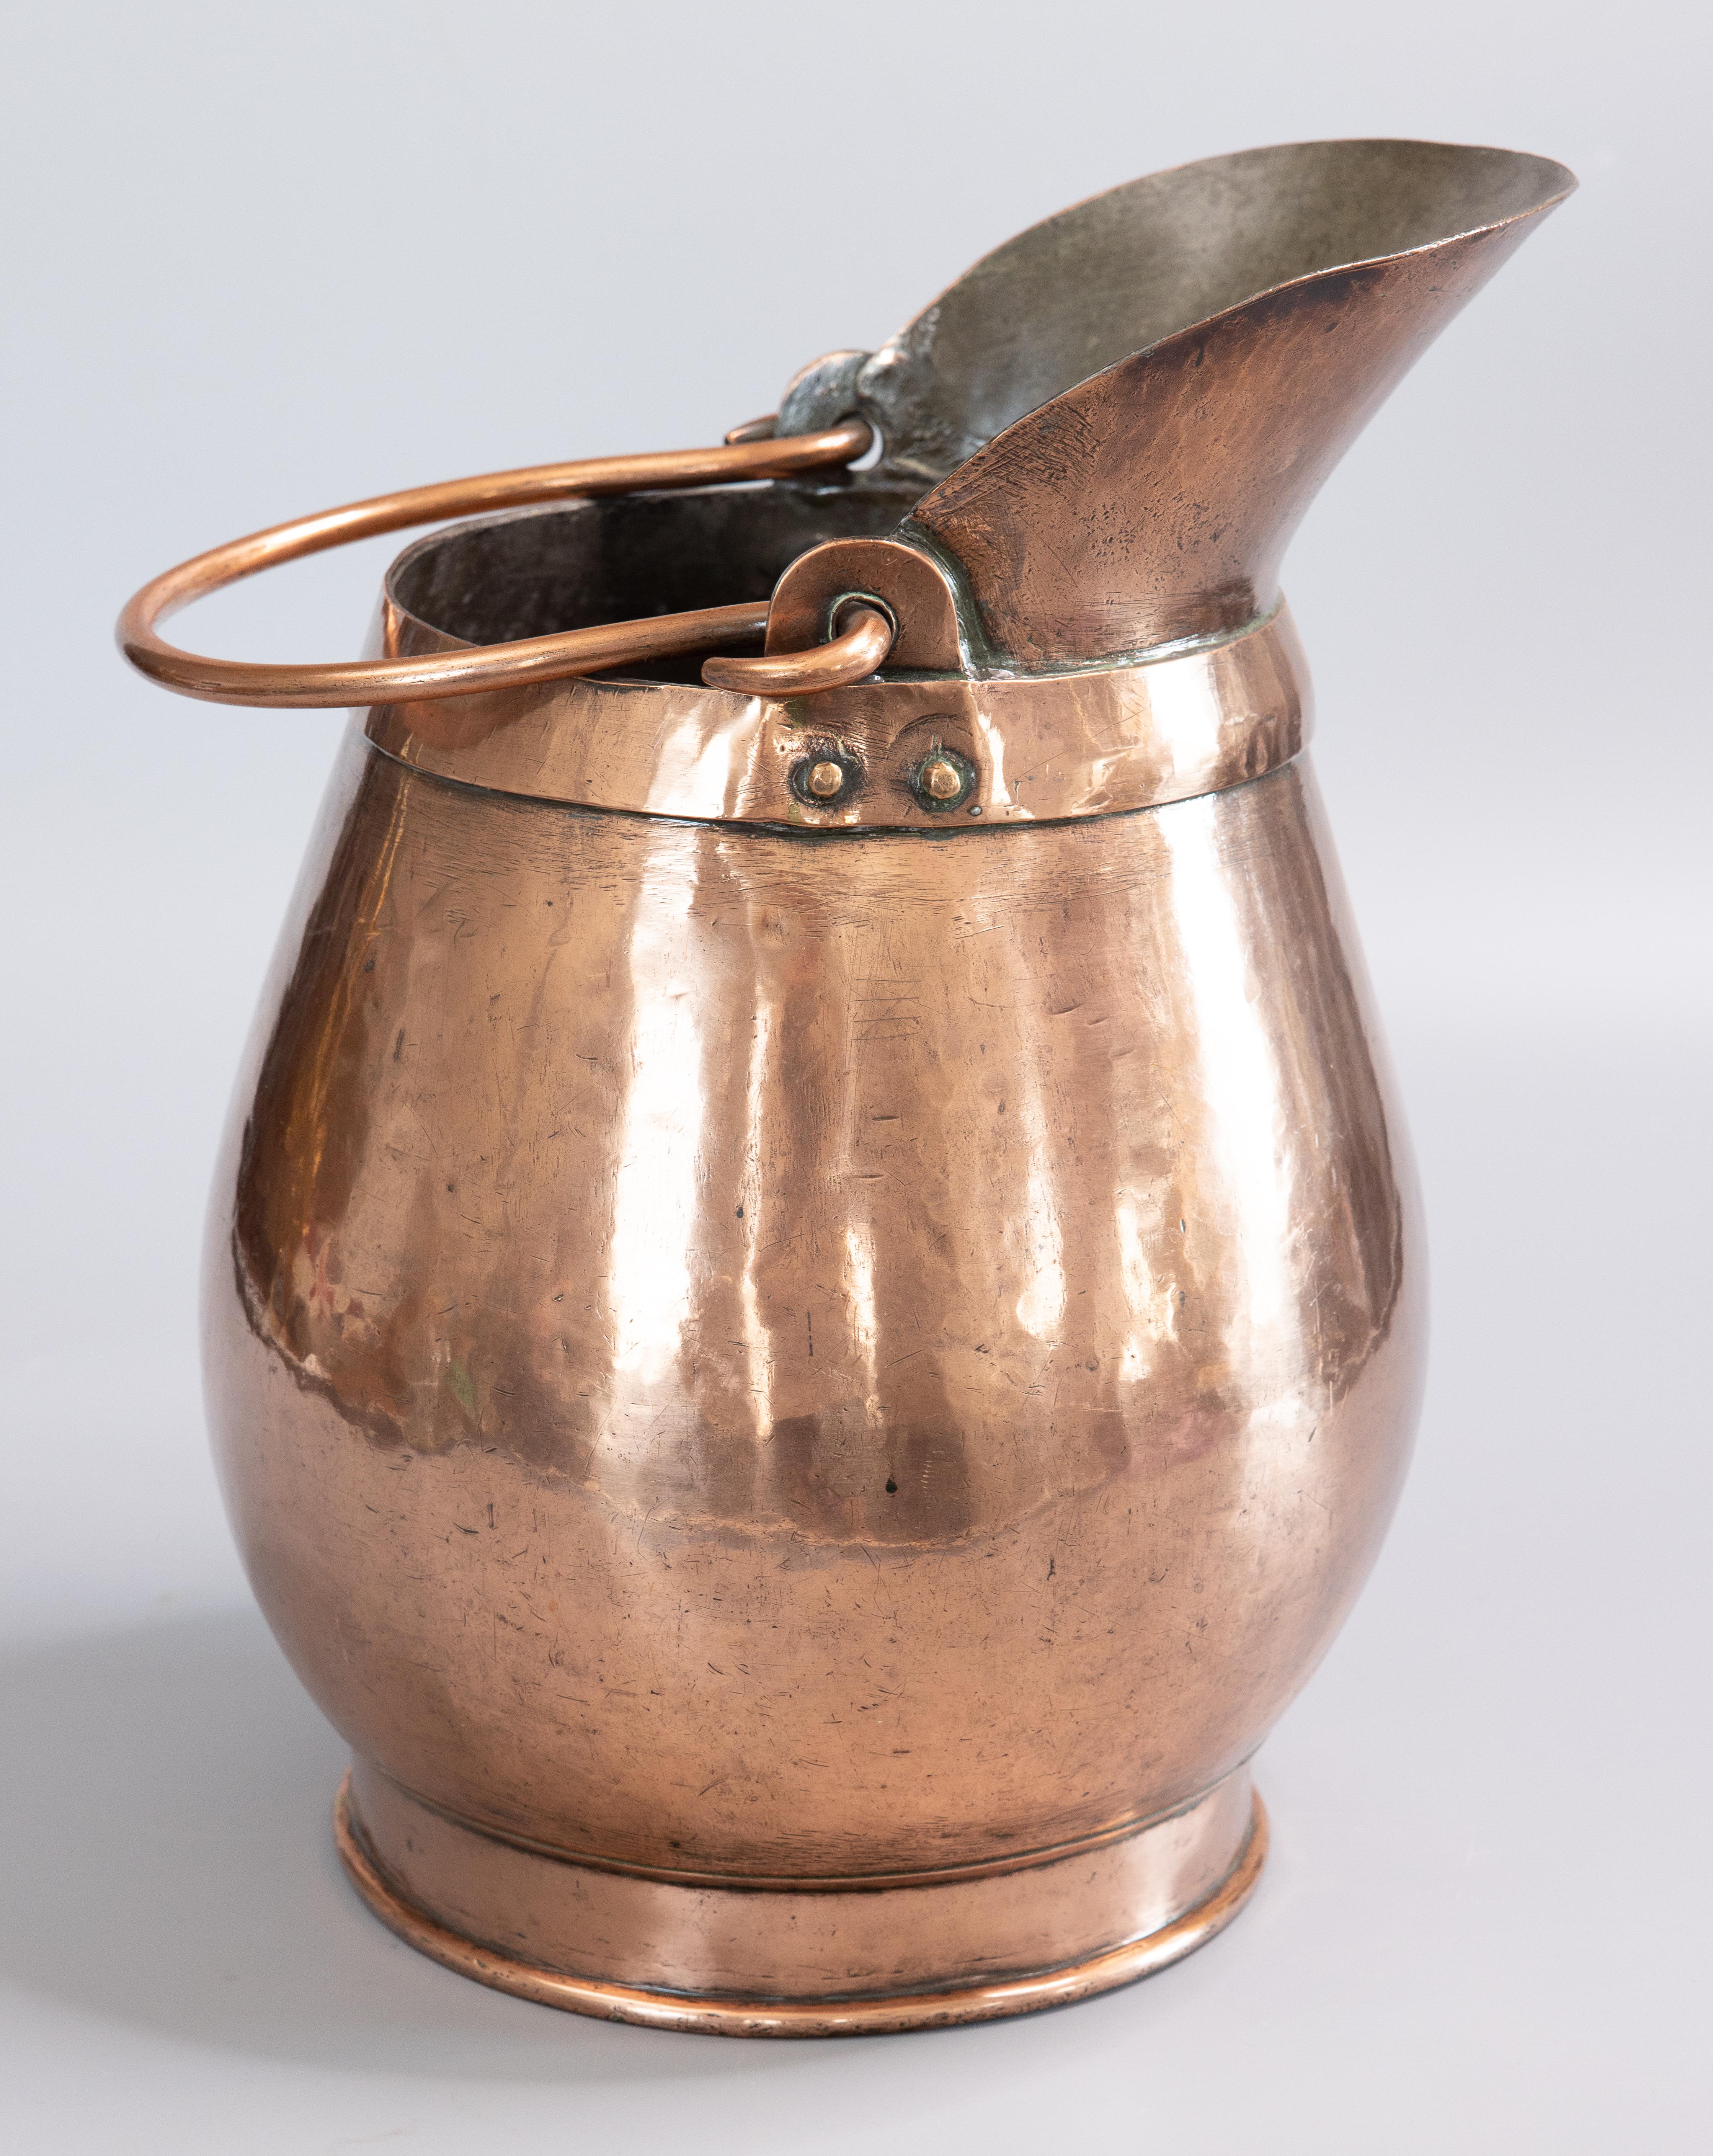 A superb large early 19th century French hand-hammered copper pitcher or jug. This gorgeous jug is solid and heavy weighing over 11 lbs, hand forged with copper rivets, dovetail seam, and a lovely swing handle. It has a beautiful patina and is in